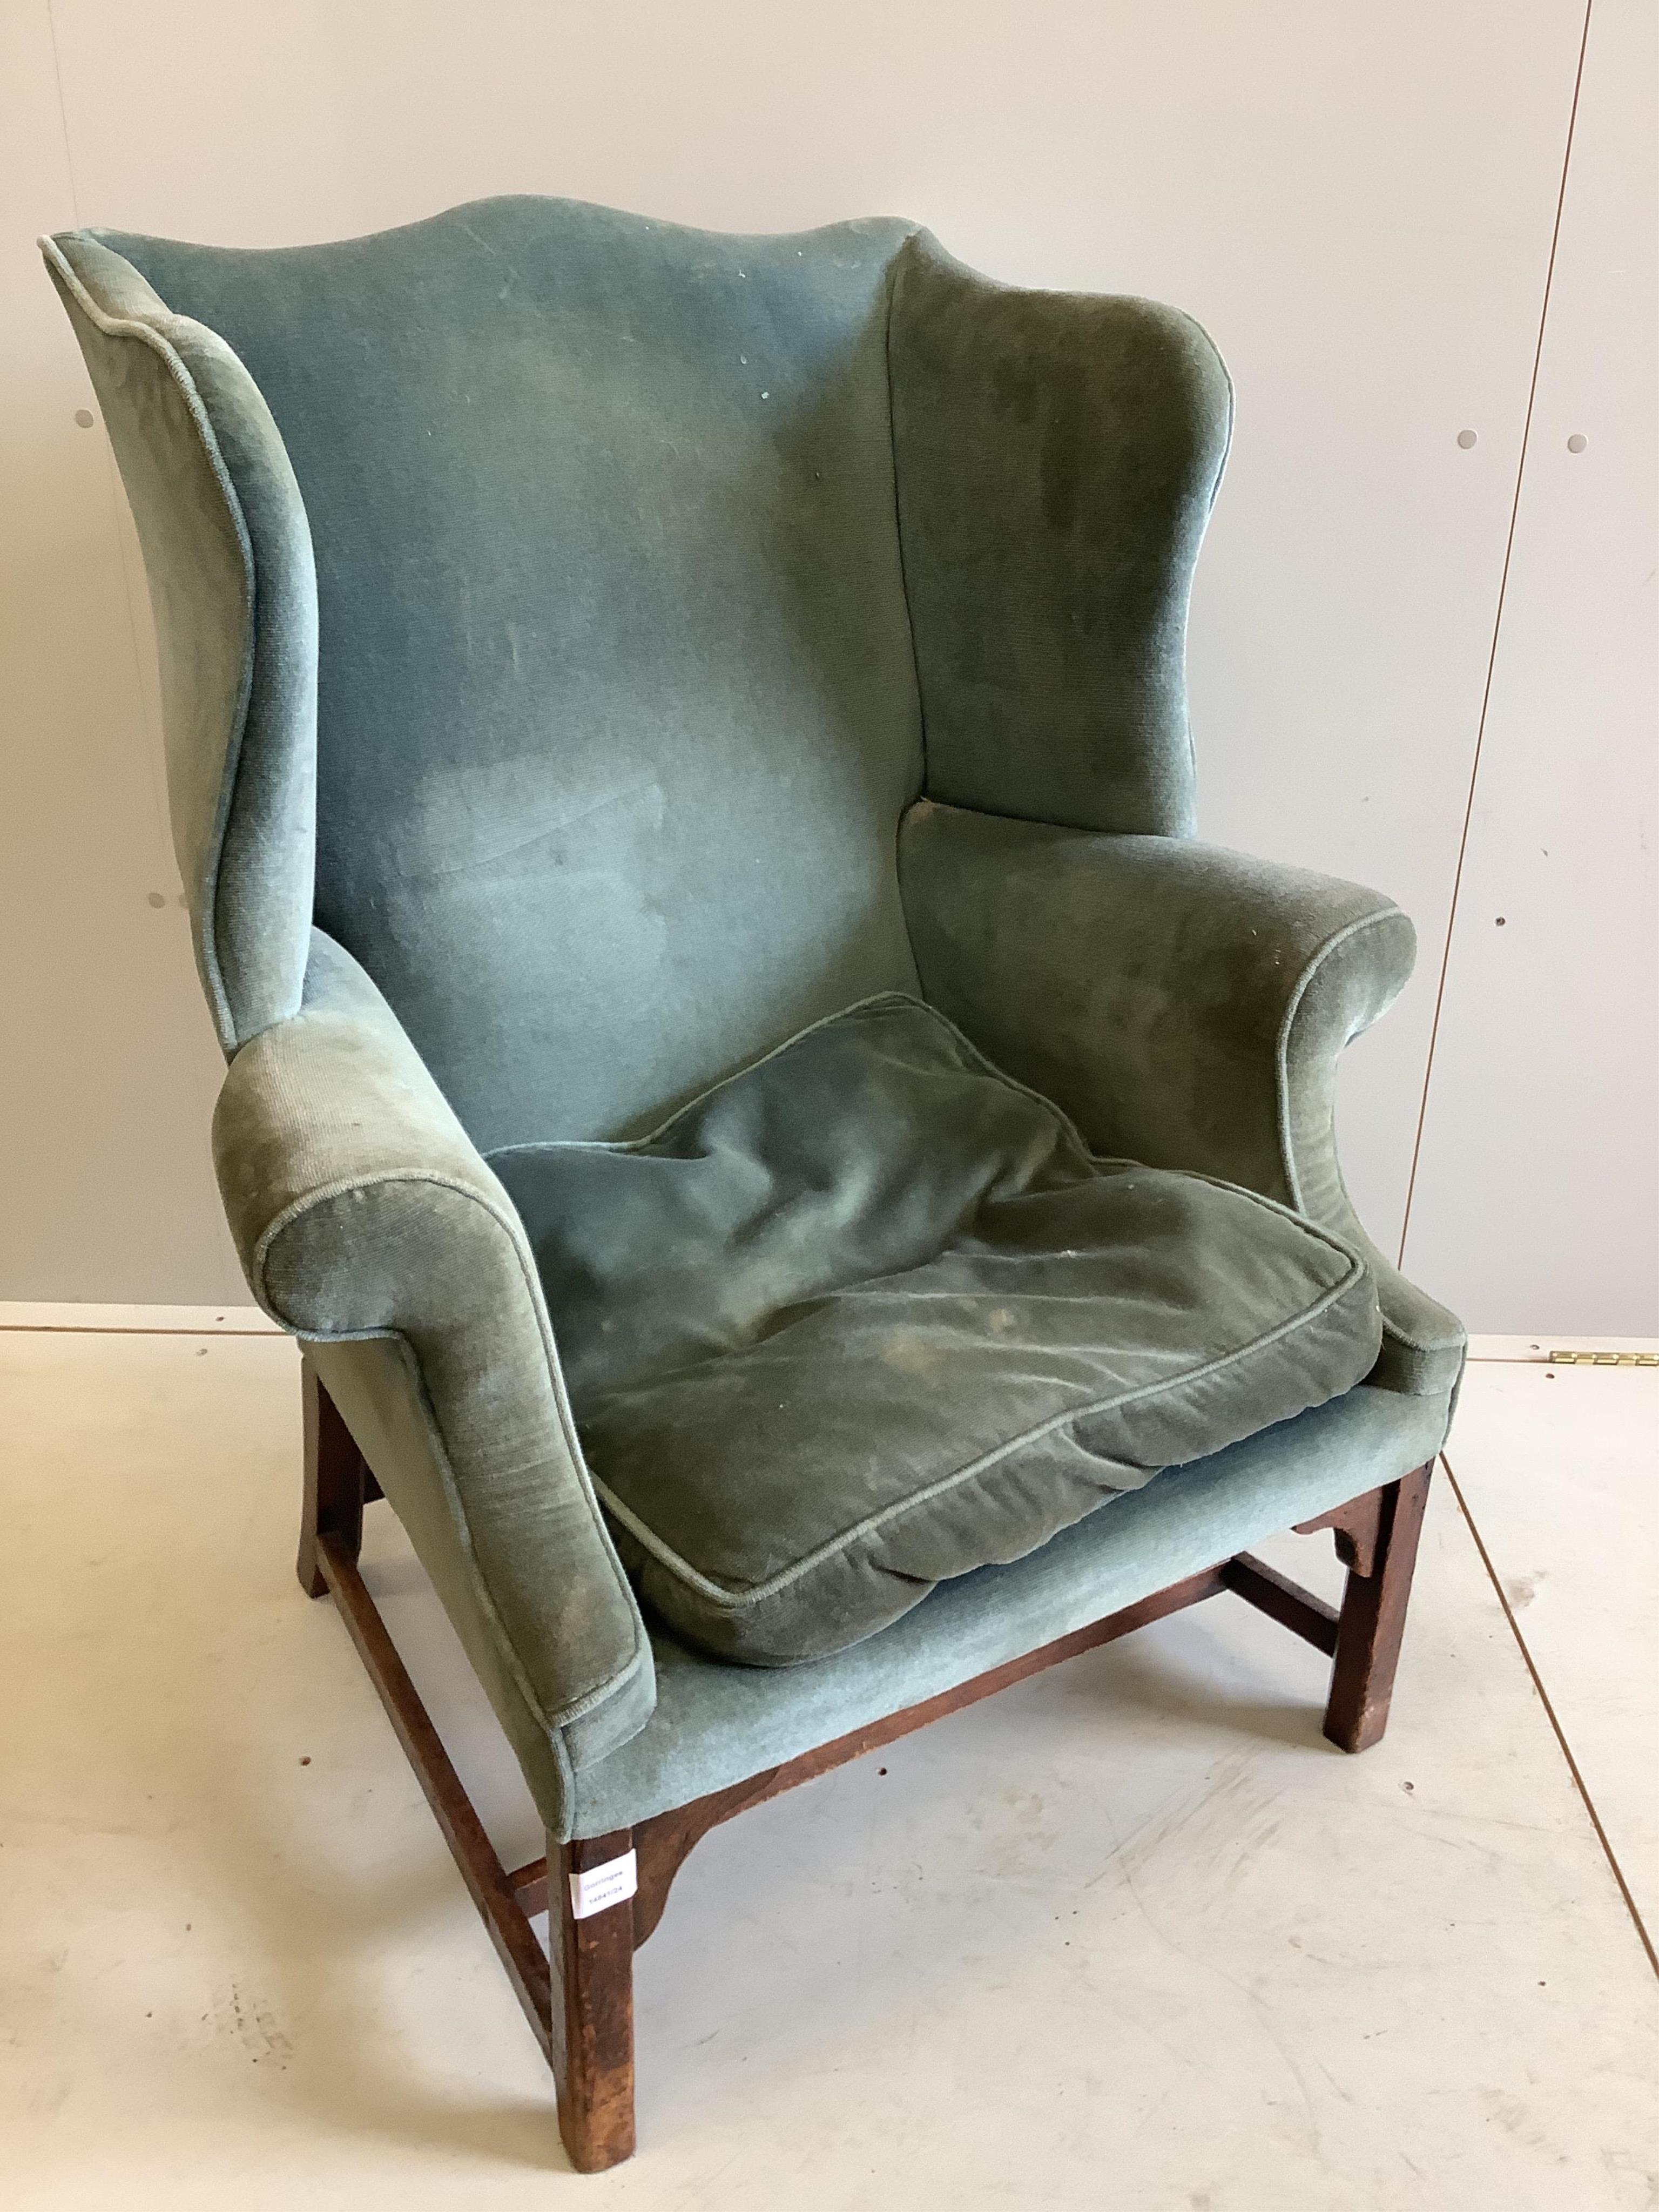 A George III upholstered wing back armchair, width 84cm, depth 64cm, height 105cm. Condition - fair